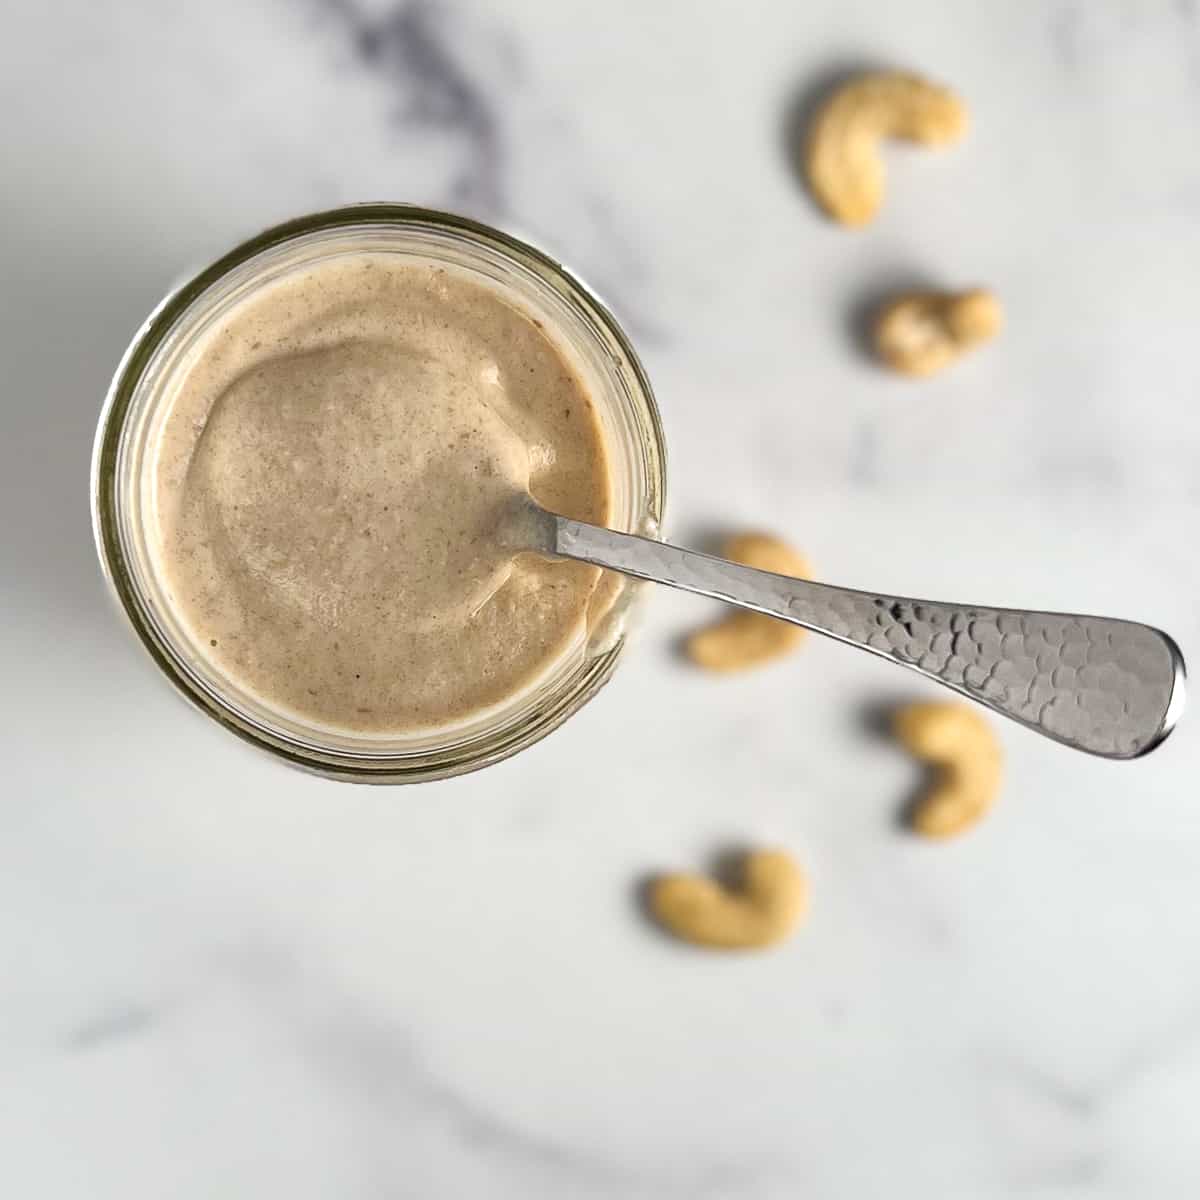 top view close up of sweet cashew cream in a glass mason jar with a spoon sticking out. loose cashews blurred in the background